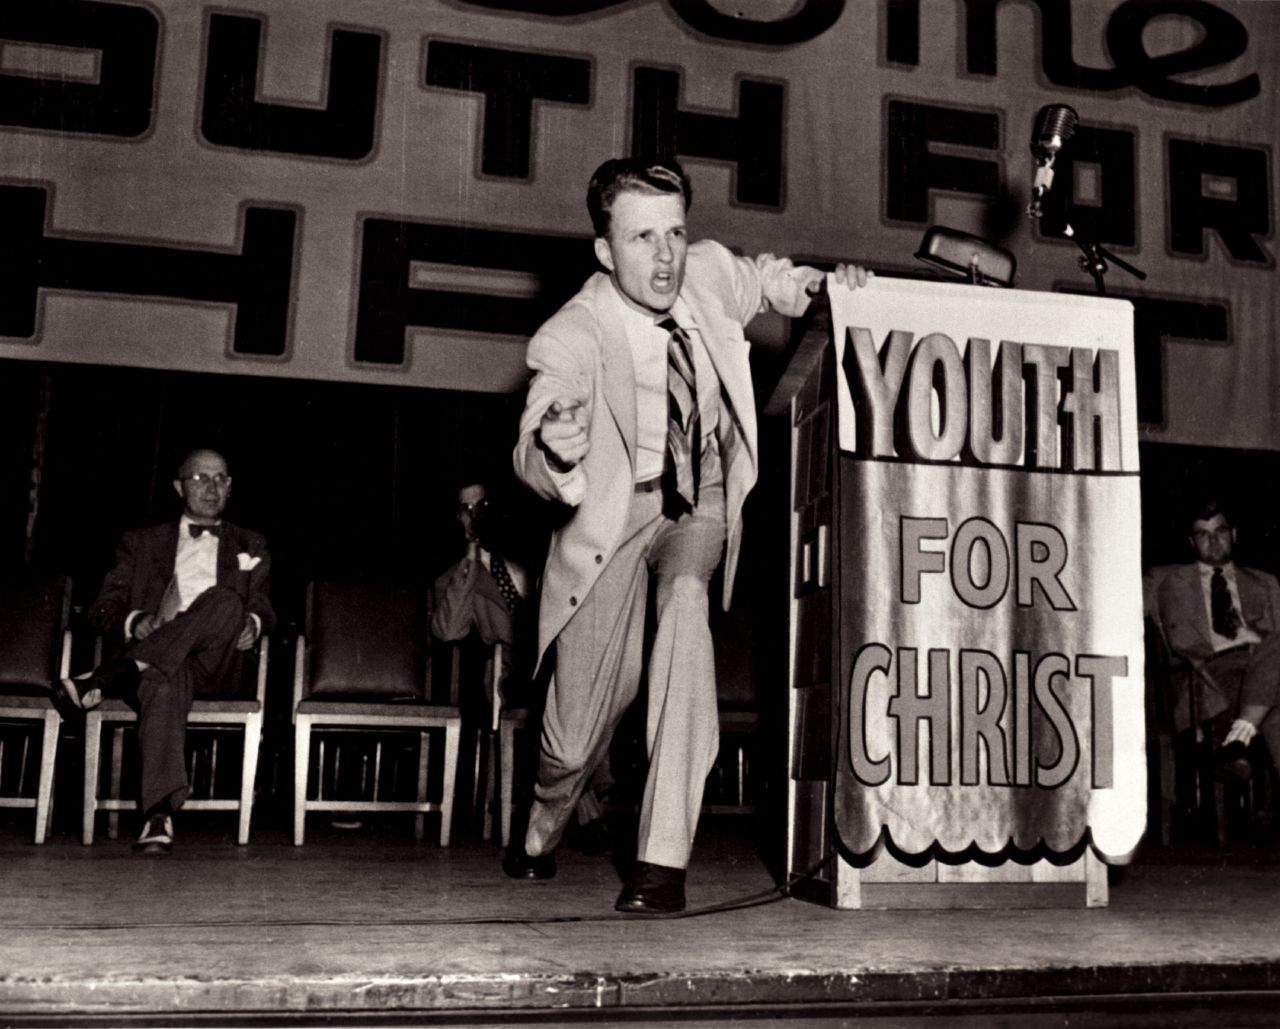 At twenty-seven, Billy resigned his pulpit to go on the road for Youth for Christ.